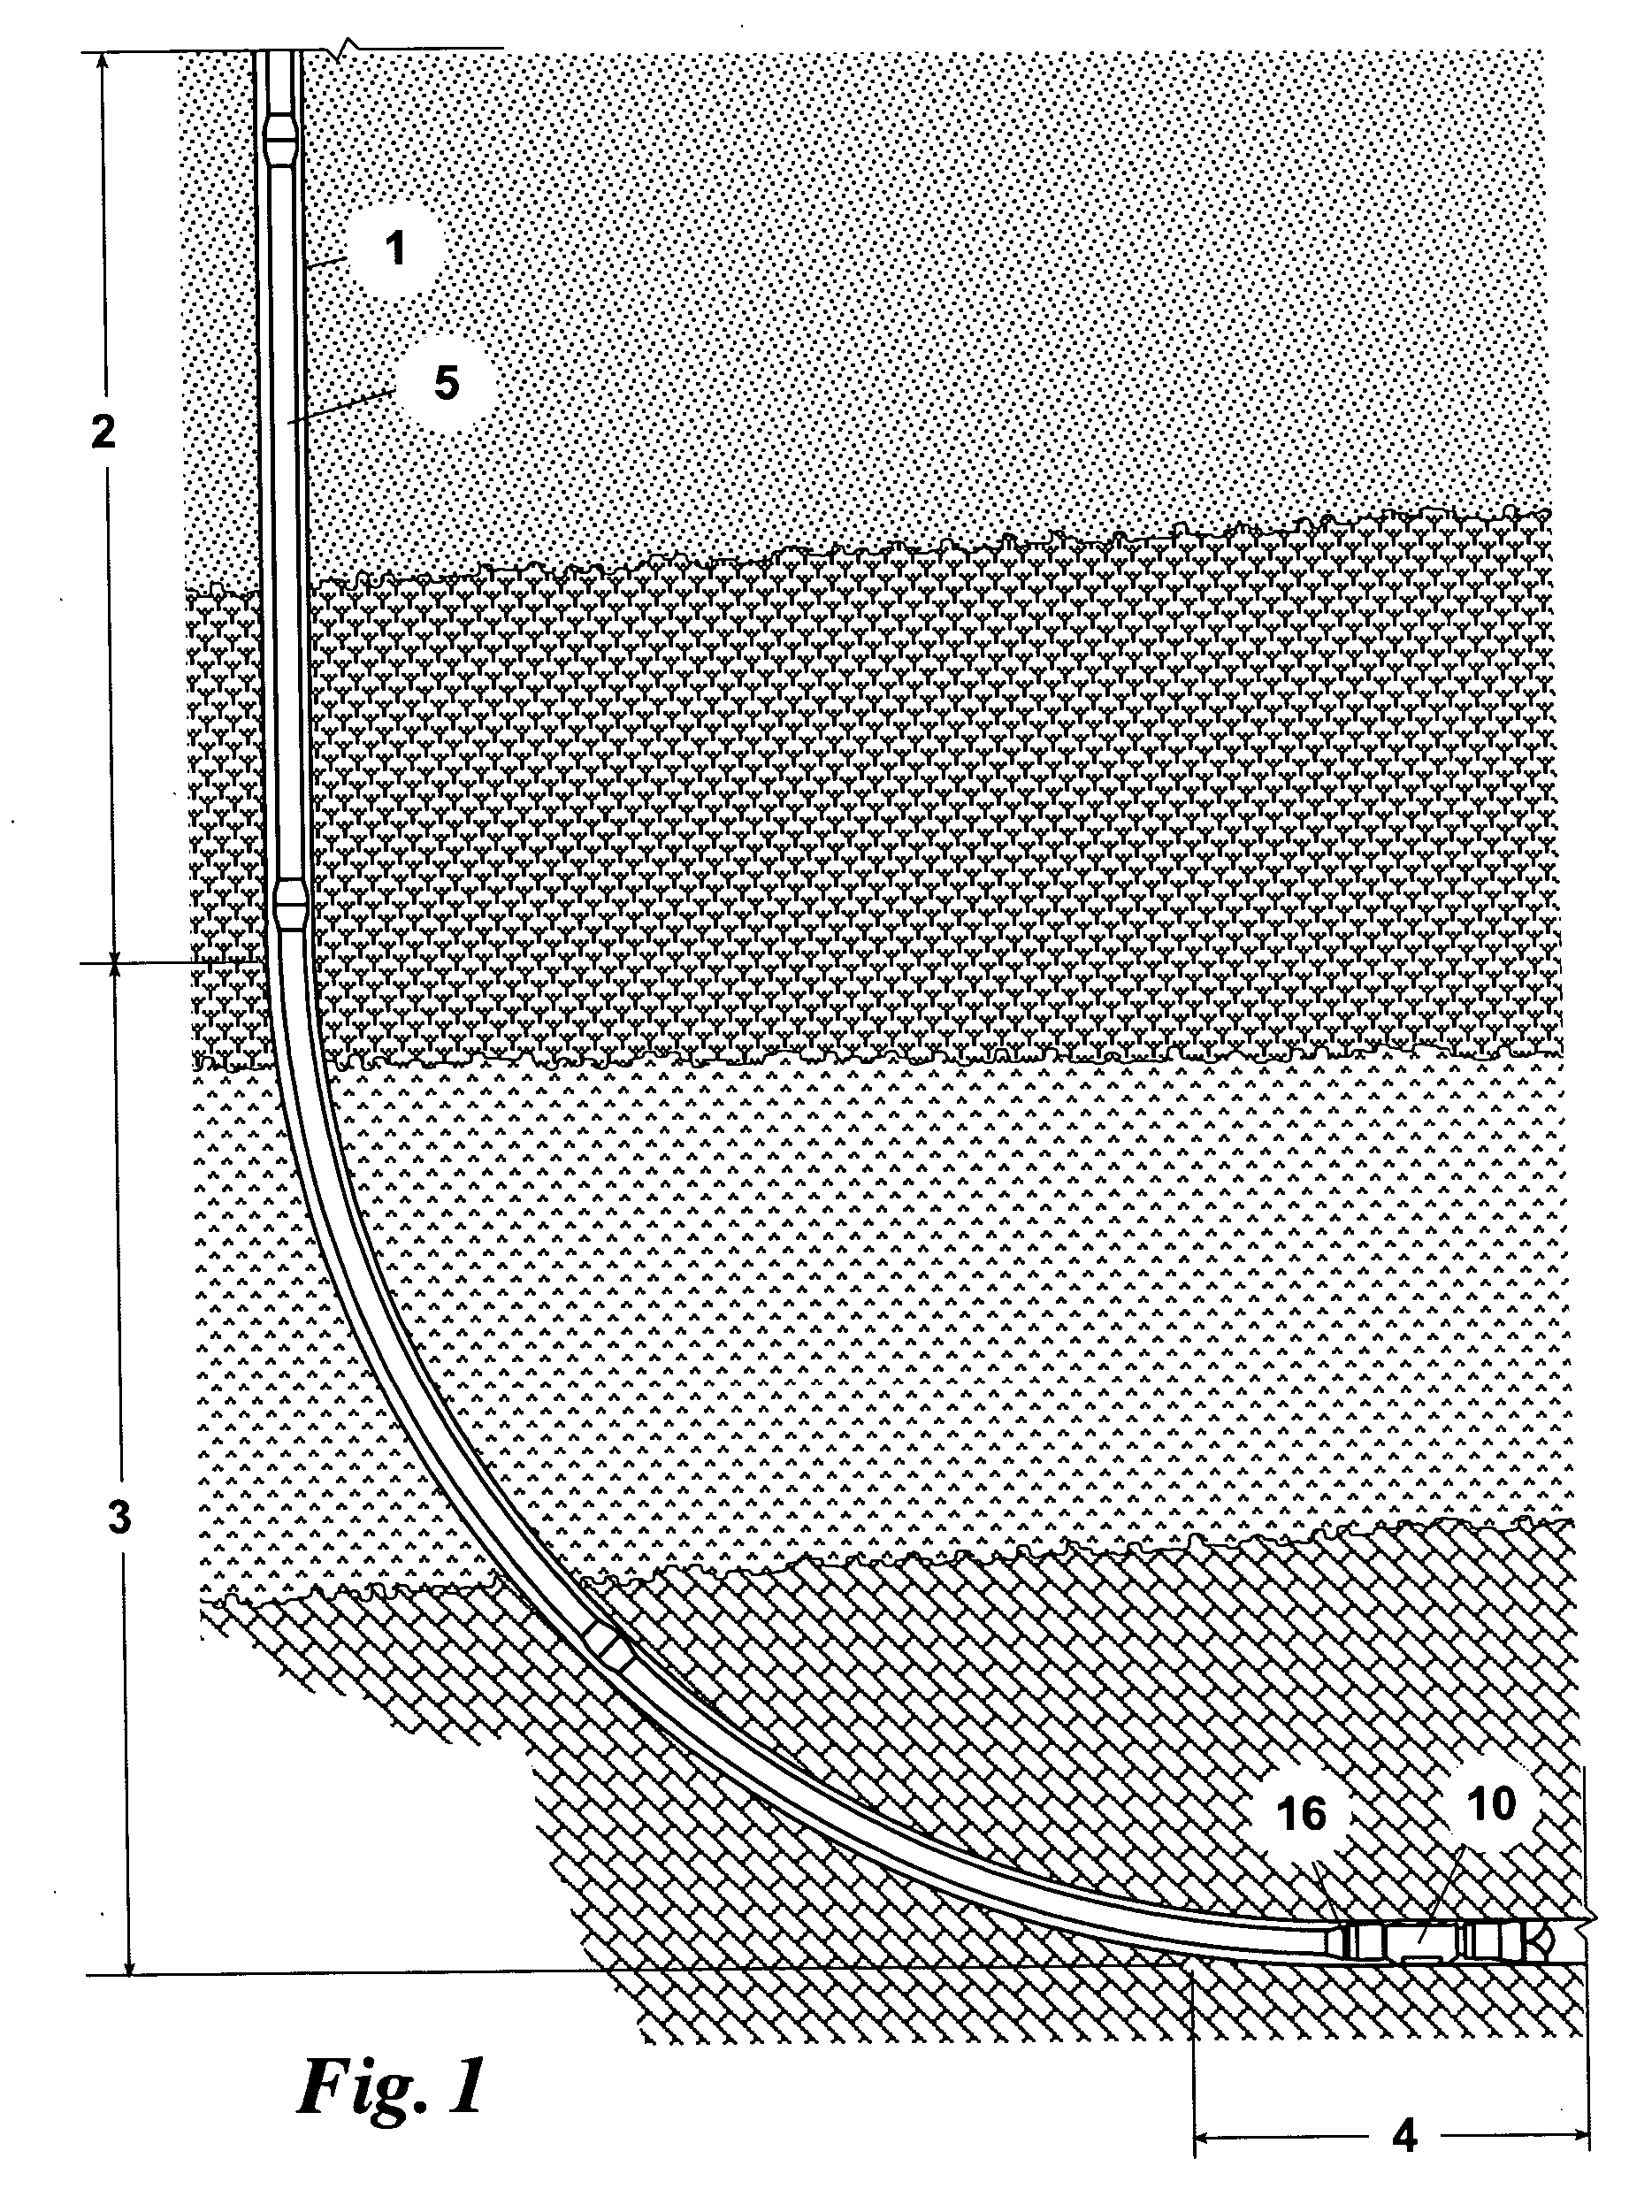 Method and apparatus for drilling curved boreholes